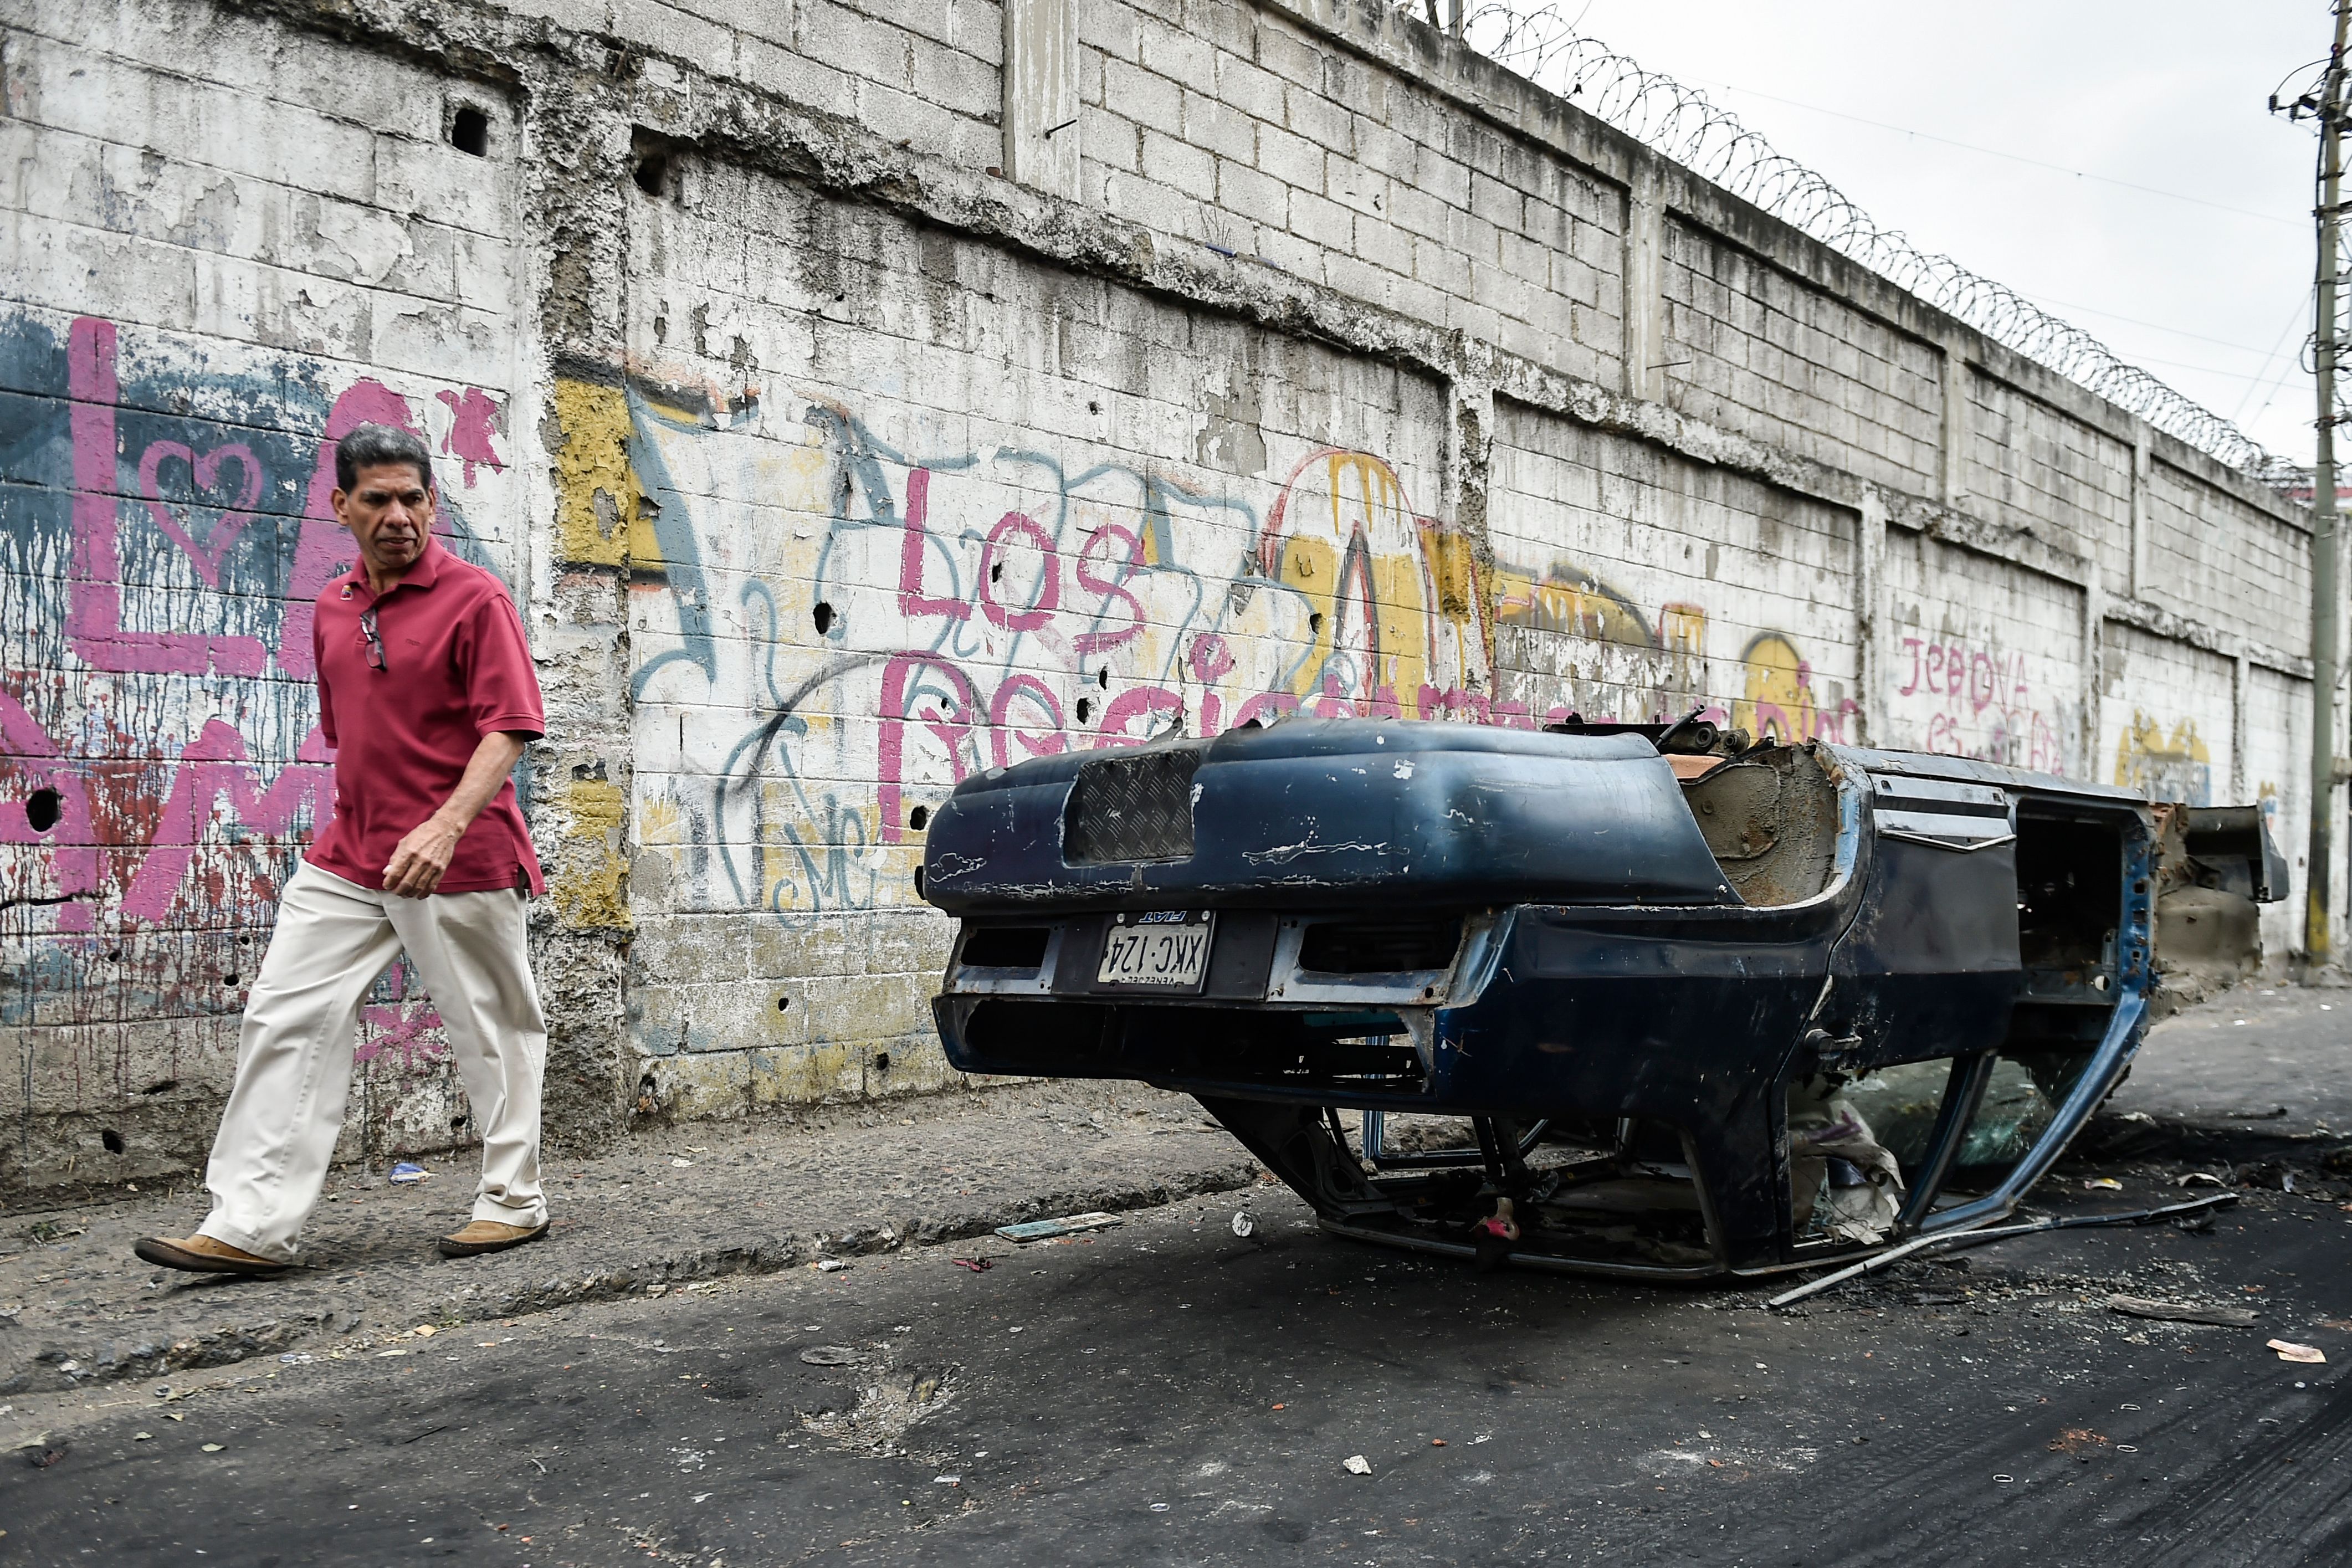 OPSHOT - A man walks by a car that was vandalised in Caracas on the eve of a march called by Venezuelan opposition on the anniversary of 1958 uprising that overthrew military dictatorship, on January 23, 2019. - At least four people have died following overnight clashes ahead of Wednesday's rival protests in Venezuela by supporters and opponents of President Nicolas Maduro, two days after a failed mutiny by soldiers hoping to spark a movement that would overthrow Maduro, police and non-governmental organizations said. (Photo by LUIS ROBAYO / AFP)        (Photo credit should read LUIS ROBAYO/AFP/Getty Images)